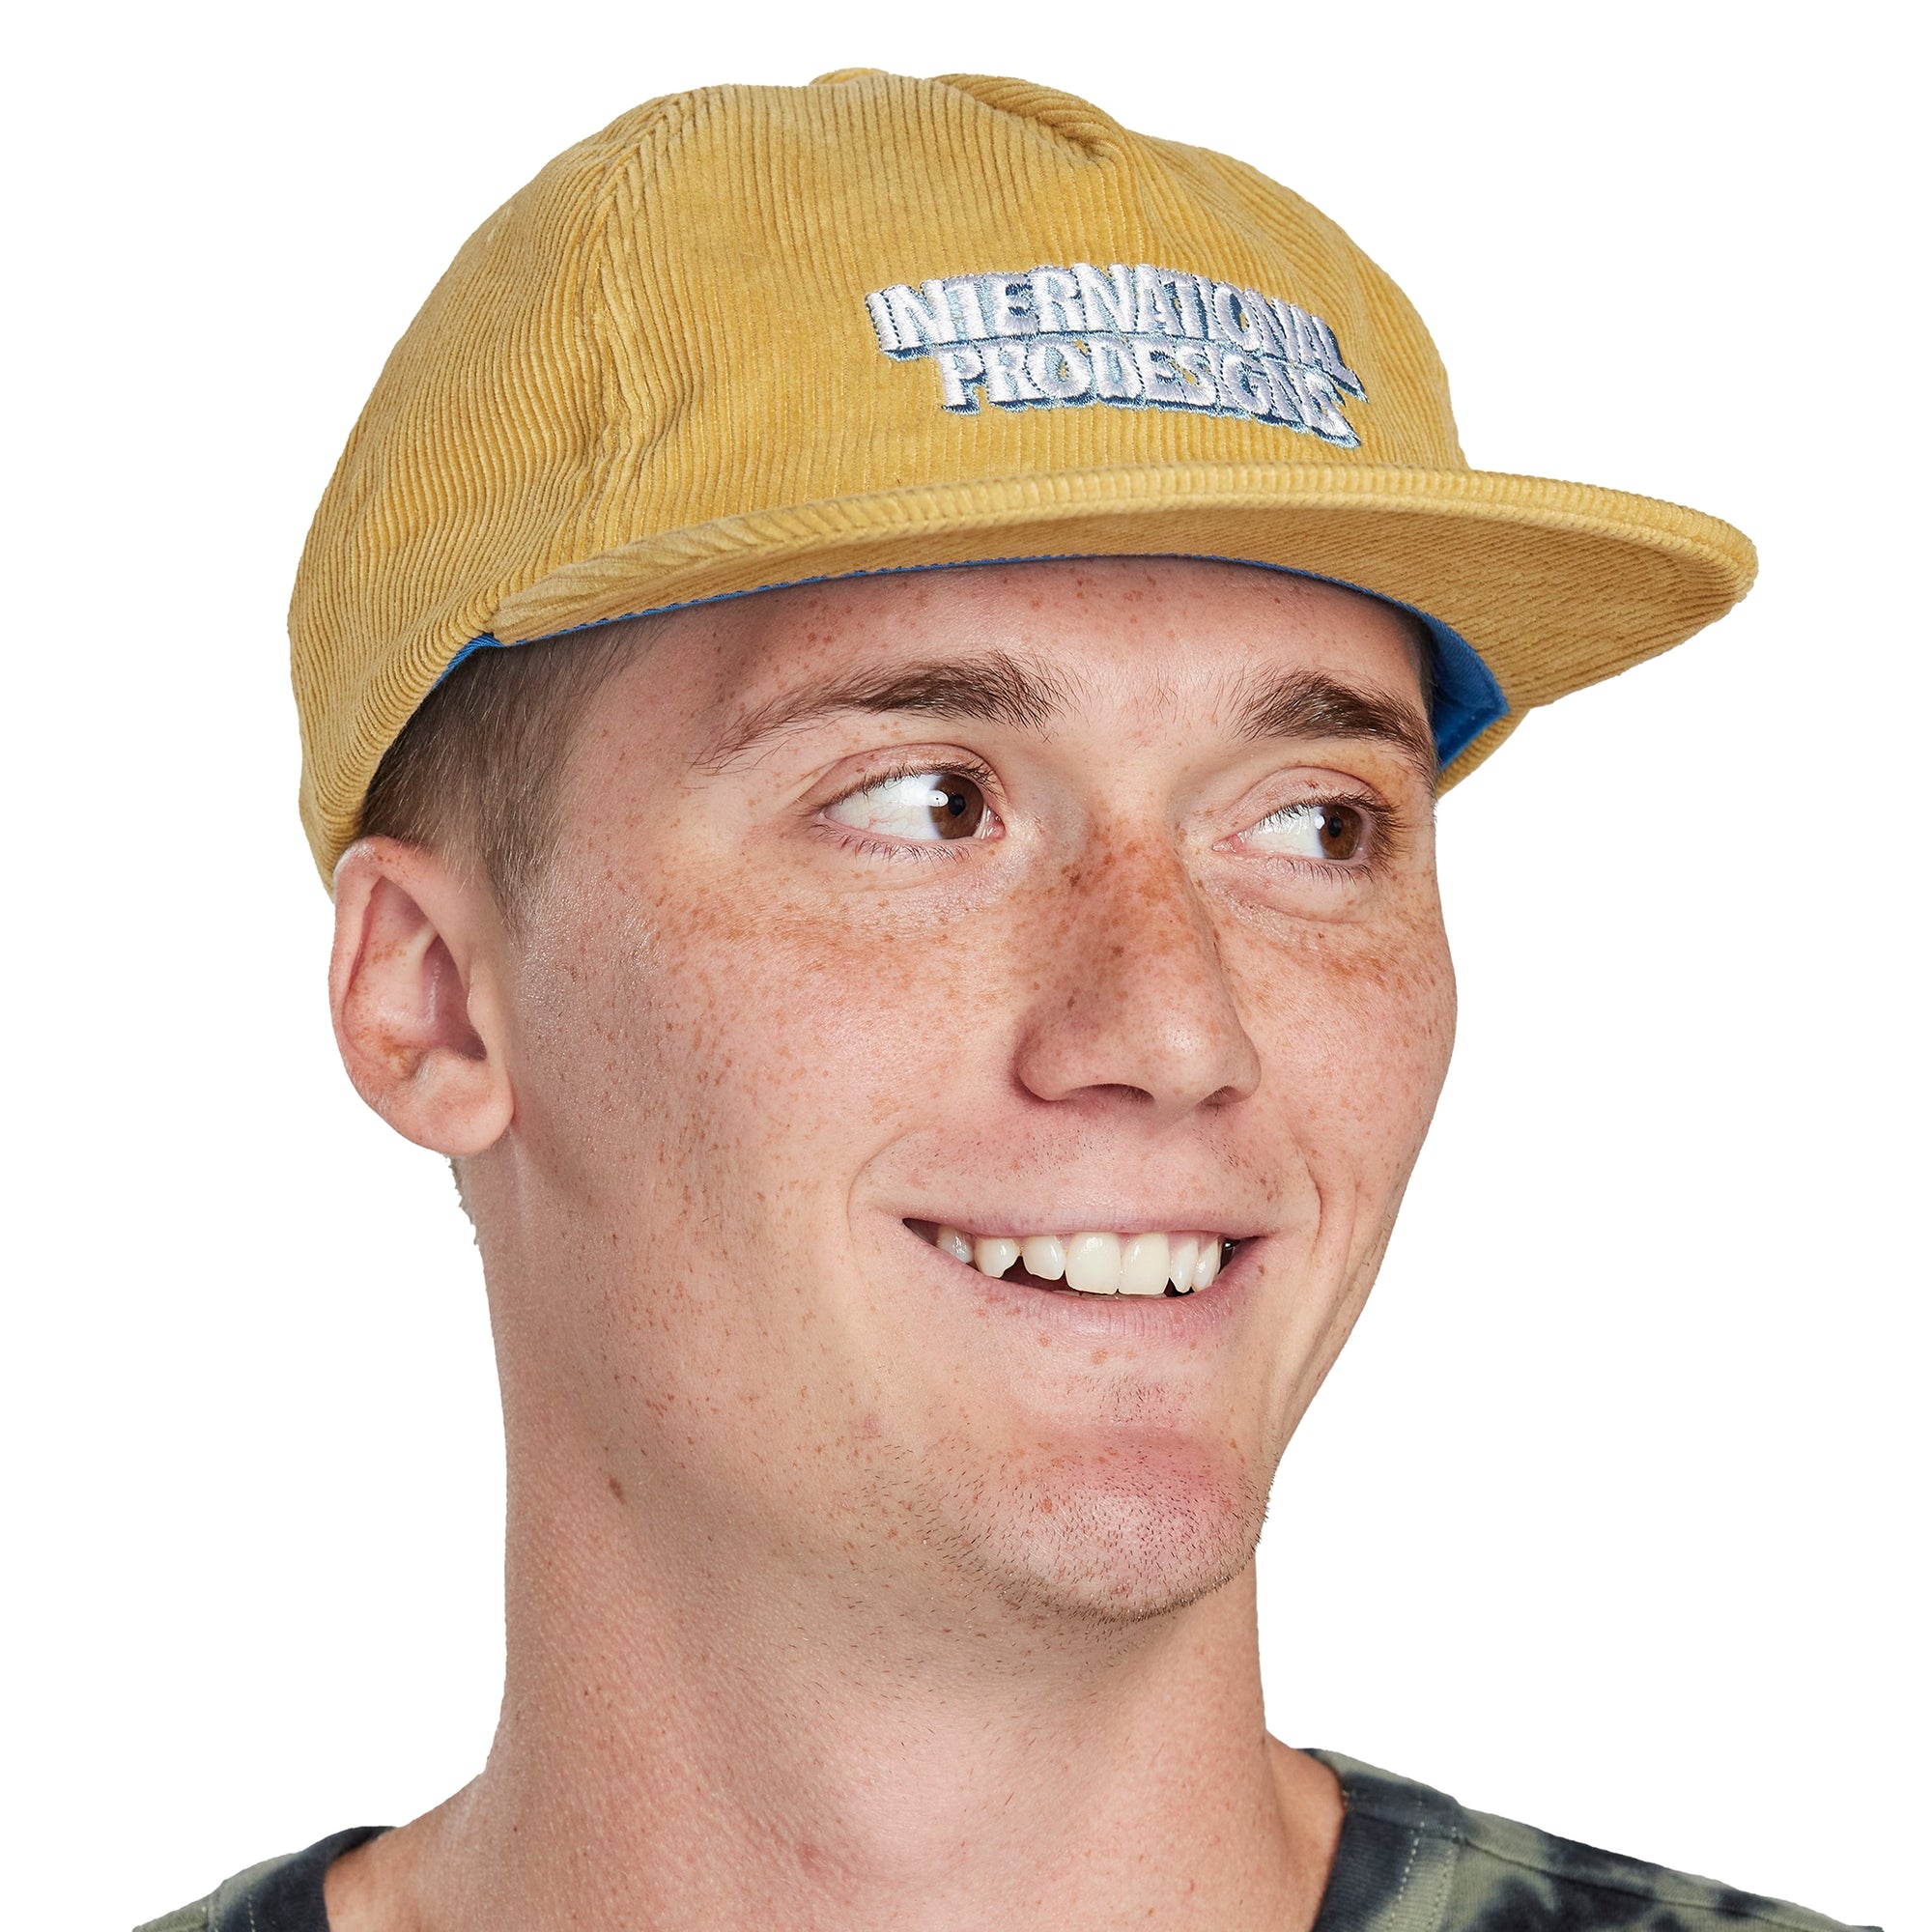 Headshot of a young man wearing a mustard color corduroy hat with the words International Pro Designs printed on the front of the hat in white block letters.